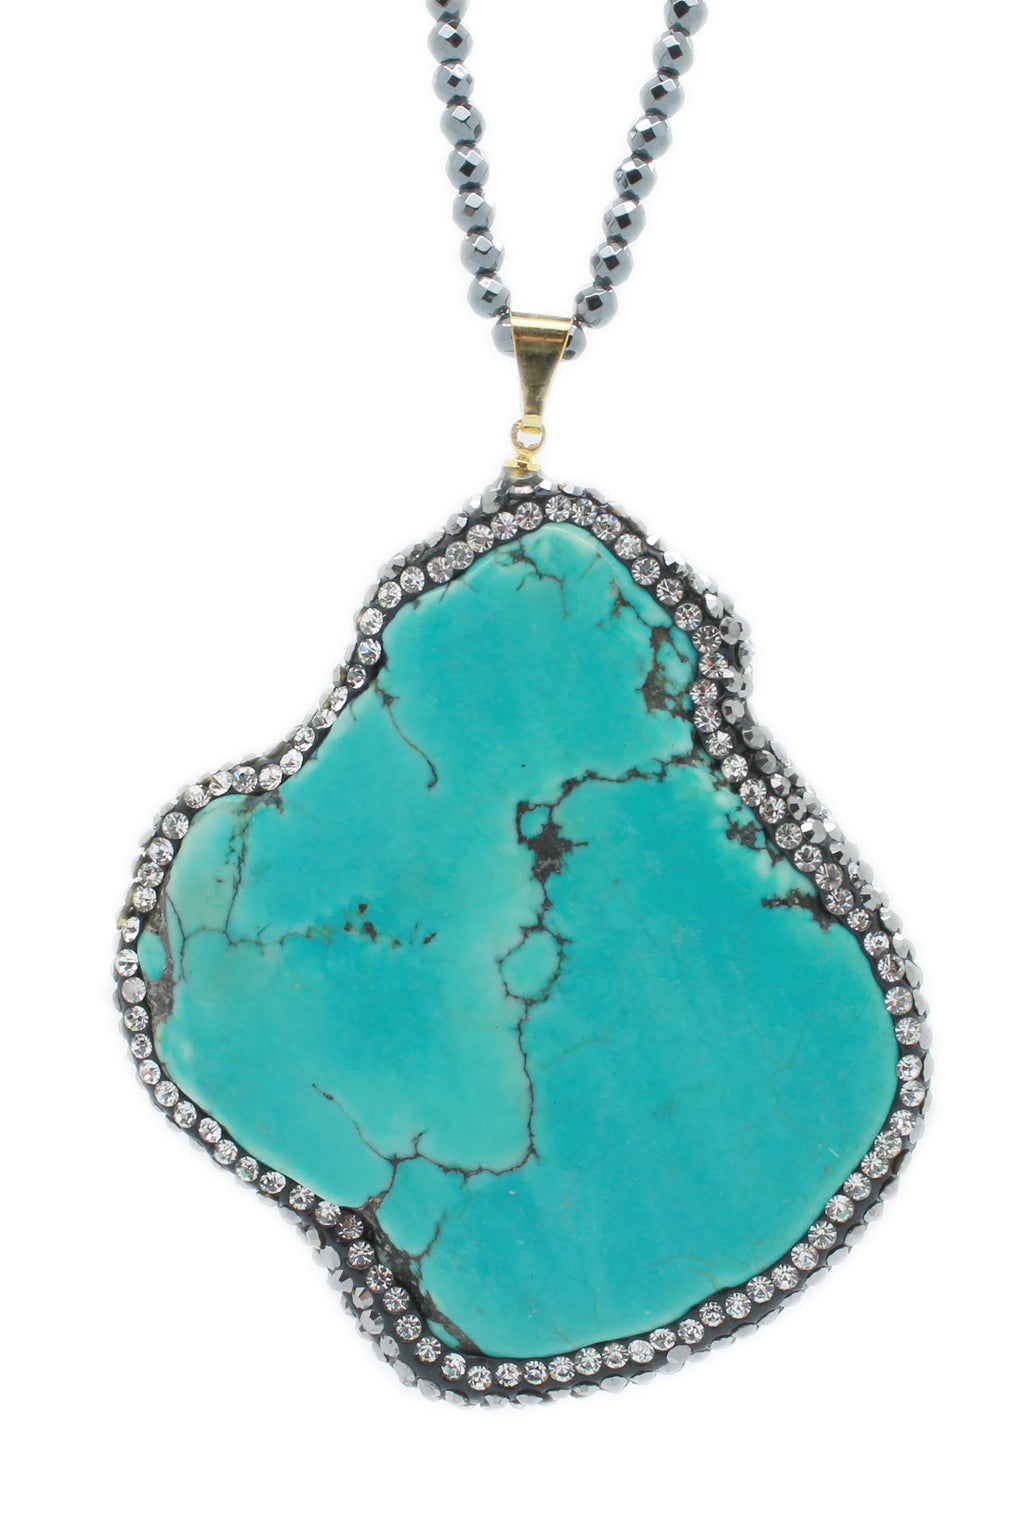 Approximately 1 inch crushed turquoise pendant with Hematite stone setting attached to a metal beaded chain.